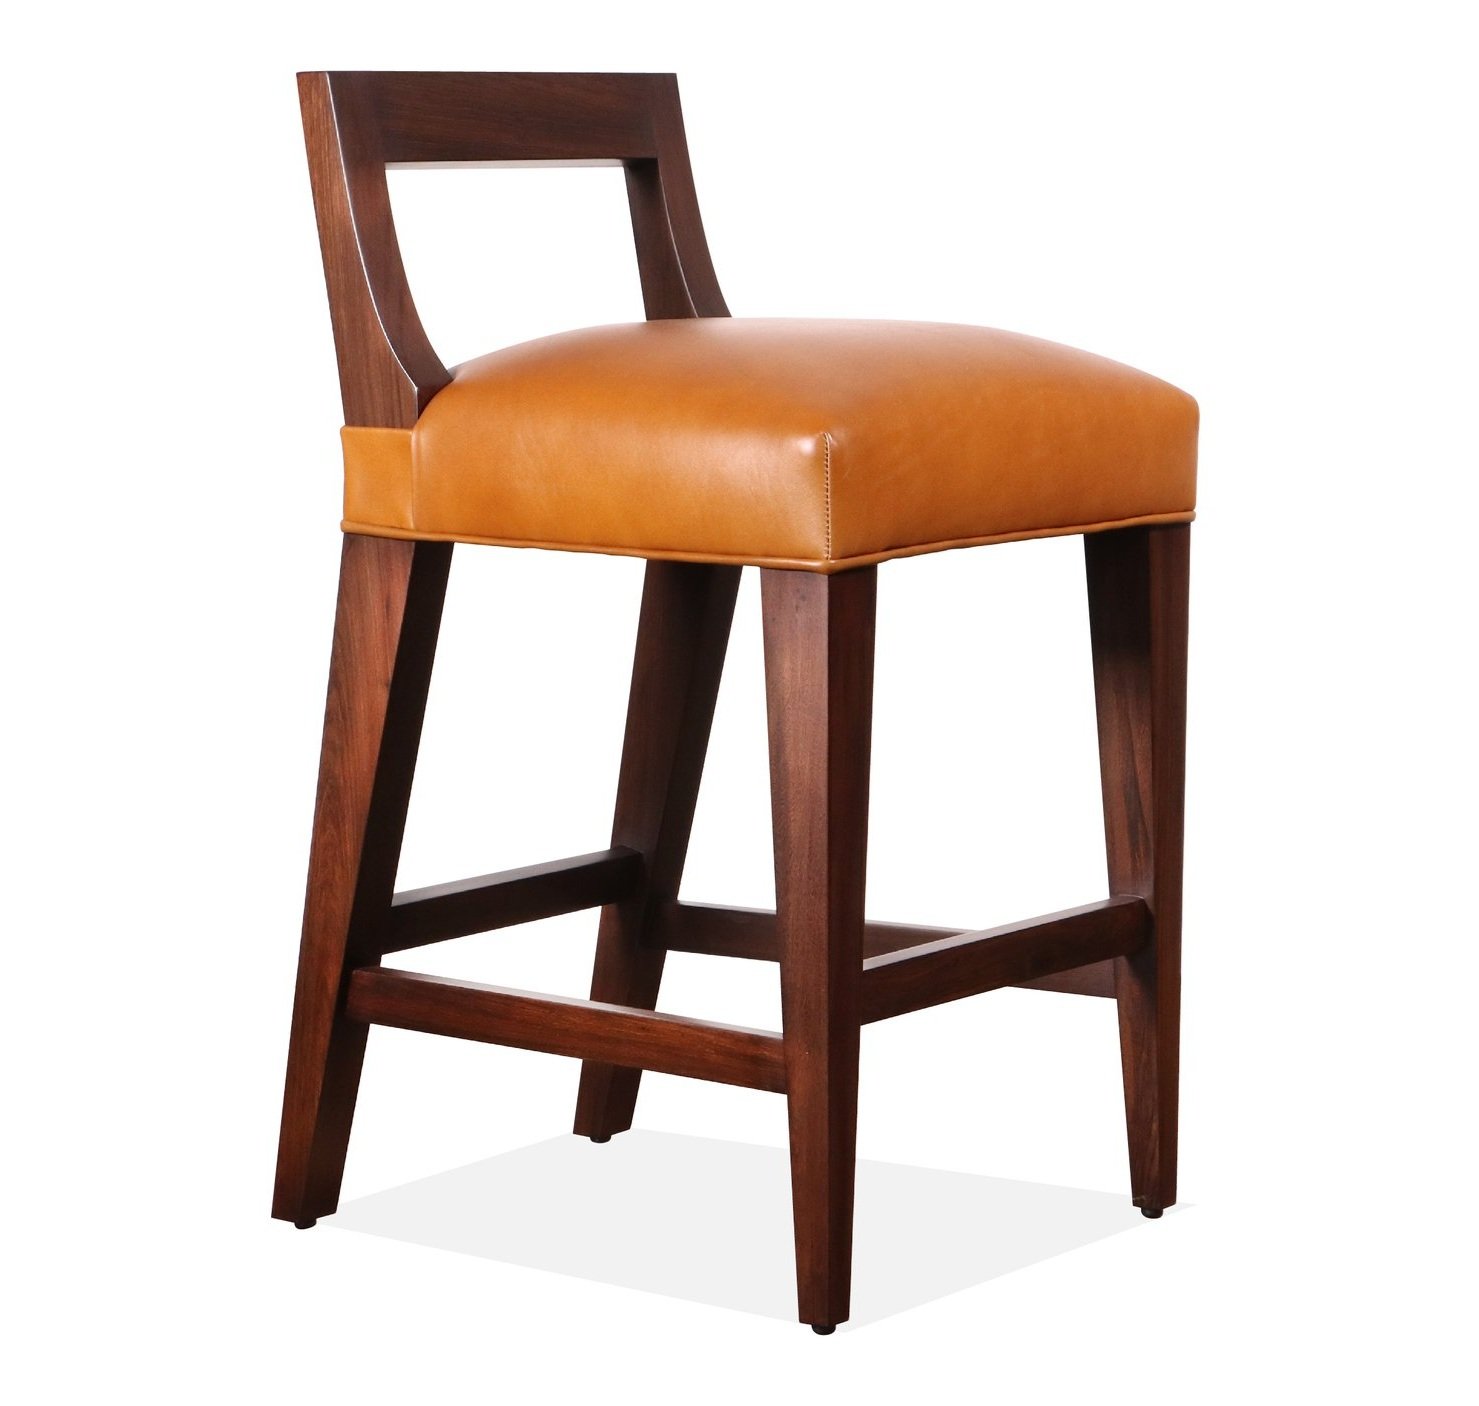 Wood Contemporary Stool in Leather by Costantini Design, Ecco — Costantini